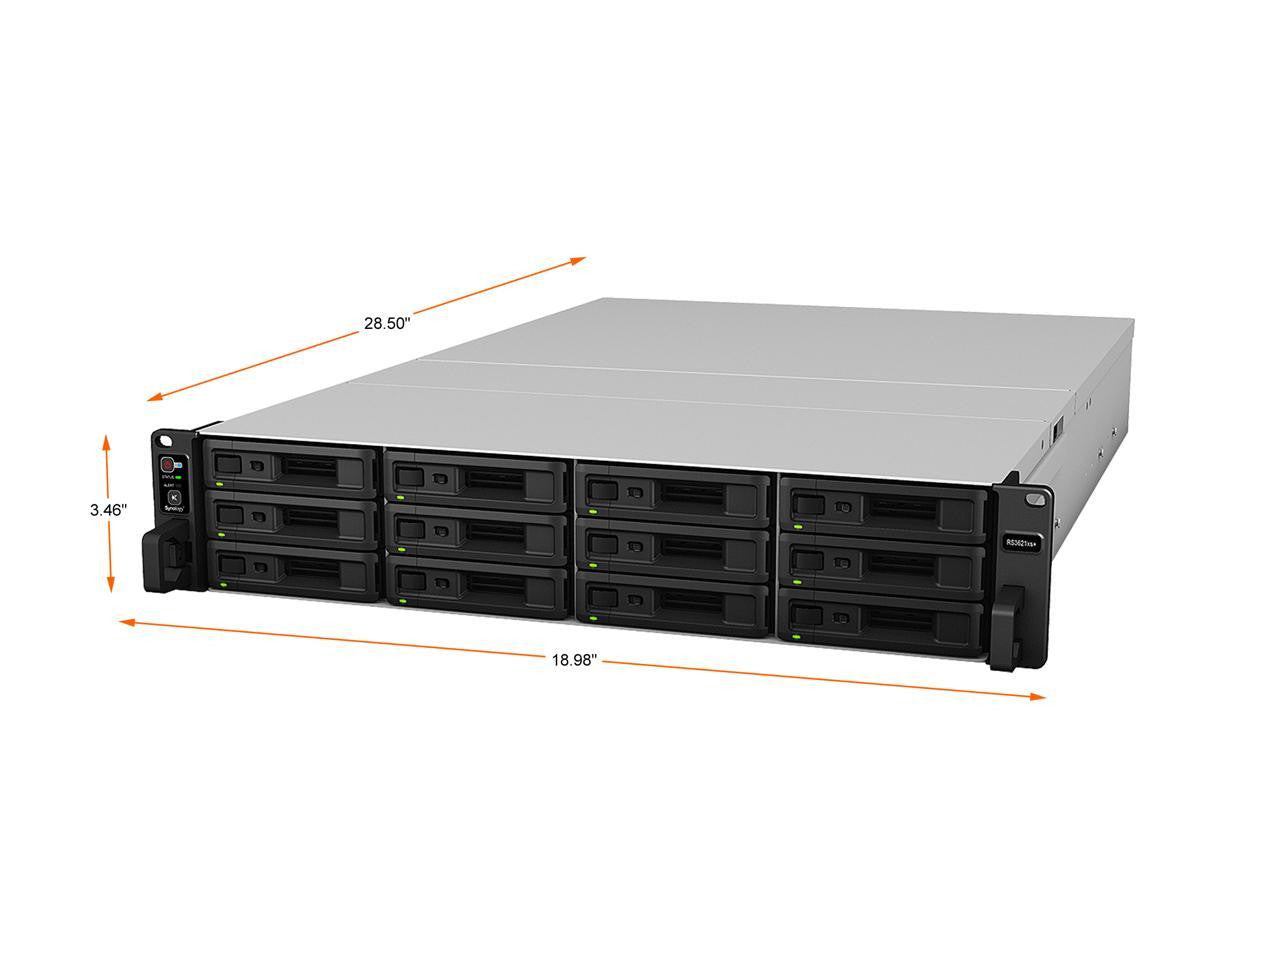 RS3621xs+ 12-BAY RackStation with 8GB RAM and 23.04TB (12 x 1.92TB) of Synology Enterprise Solid State Drives